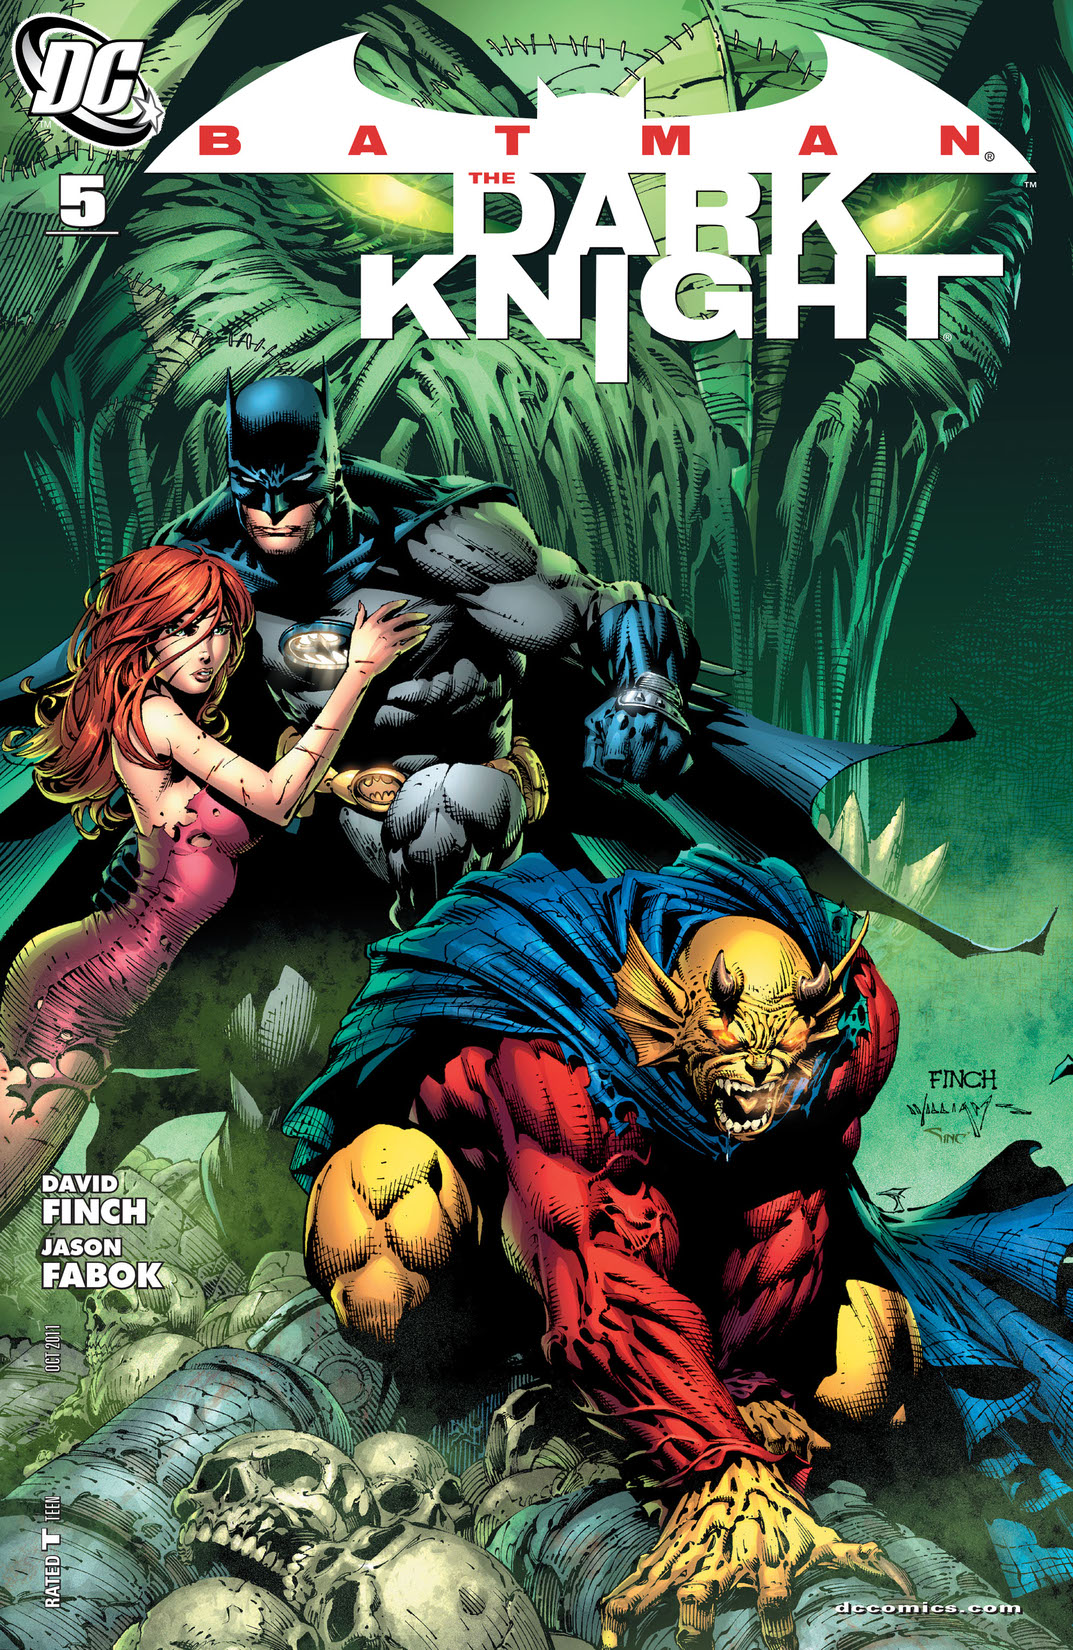 Batman: The Dark Knight (2010-) #5 preview images